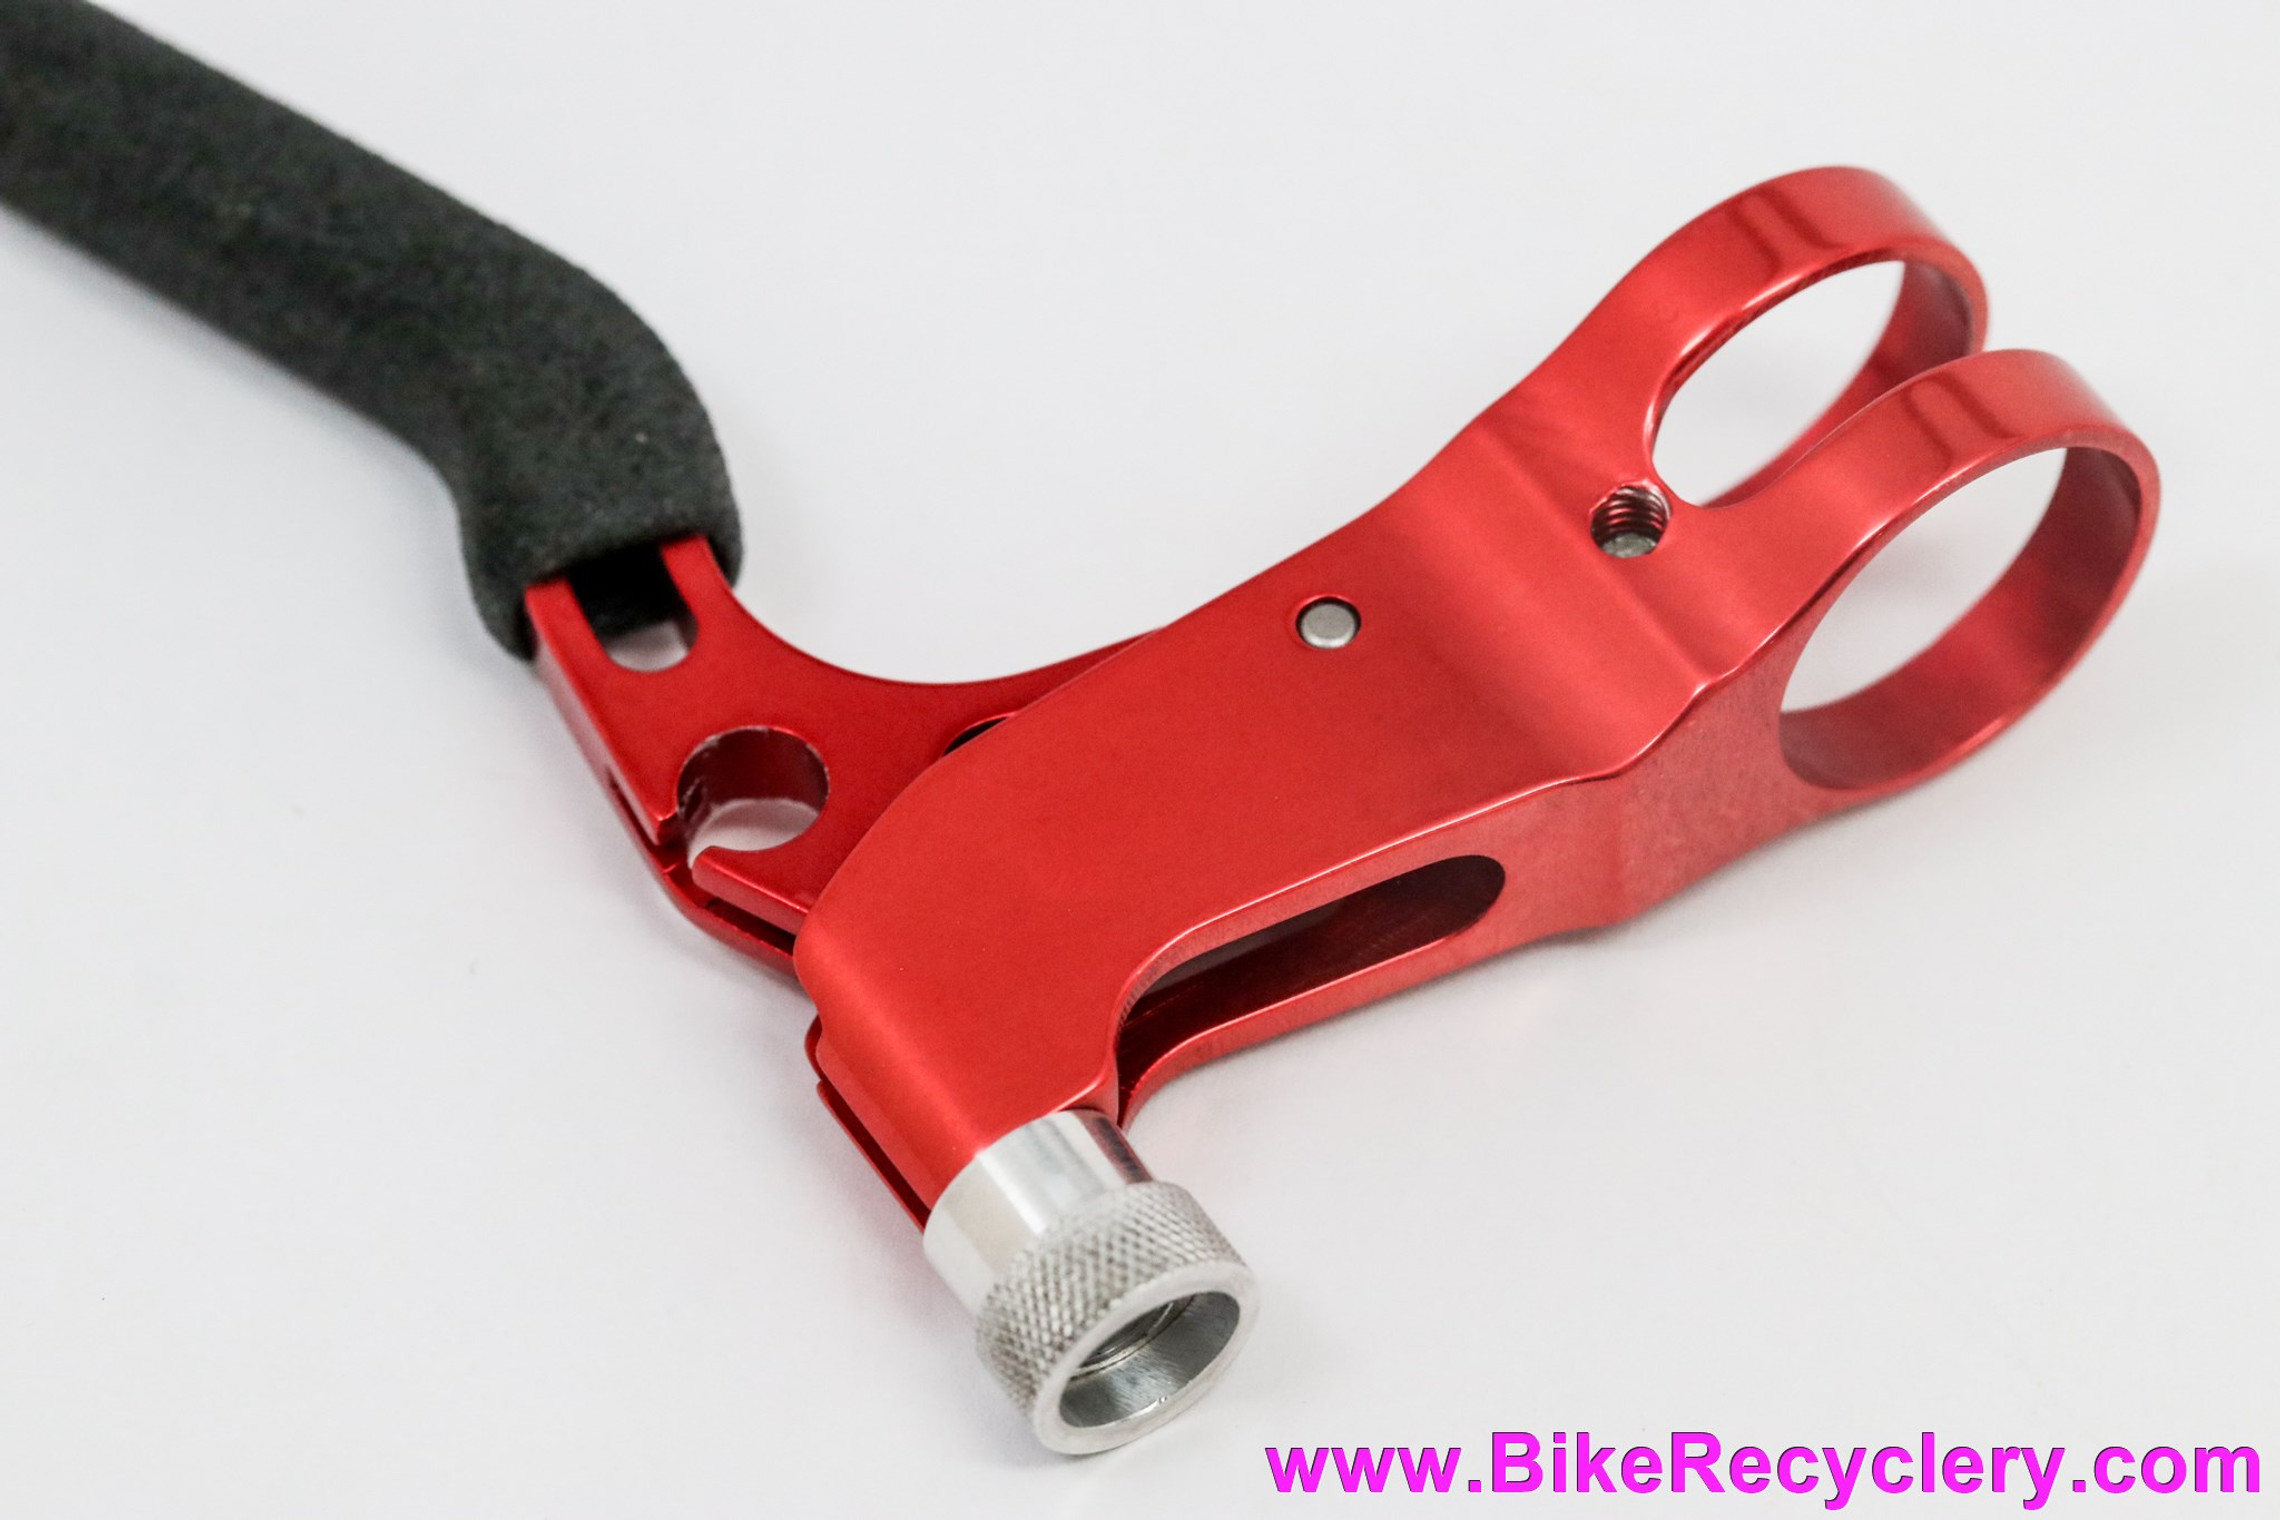 NOS Kooka Racha Brake Levers: Red Ano - 1990's Cantilever (Take-Off)